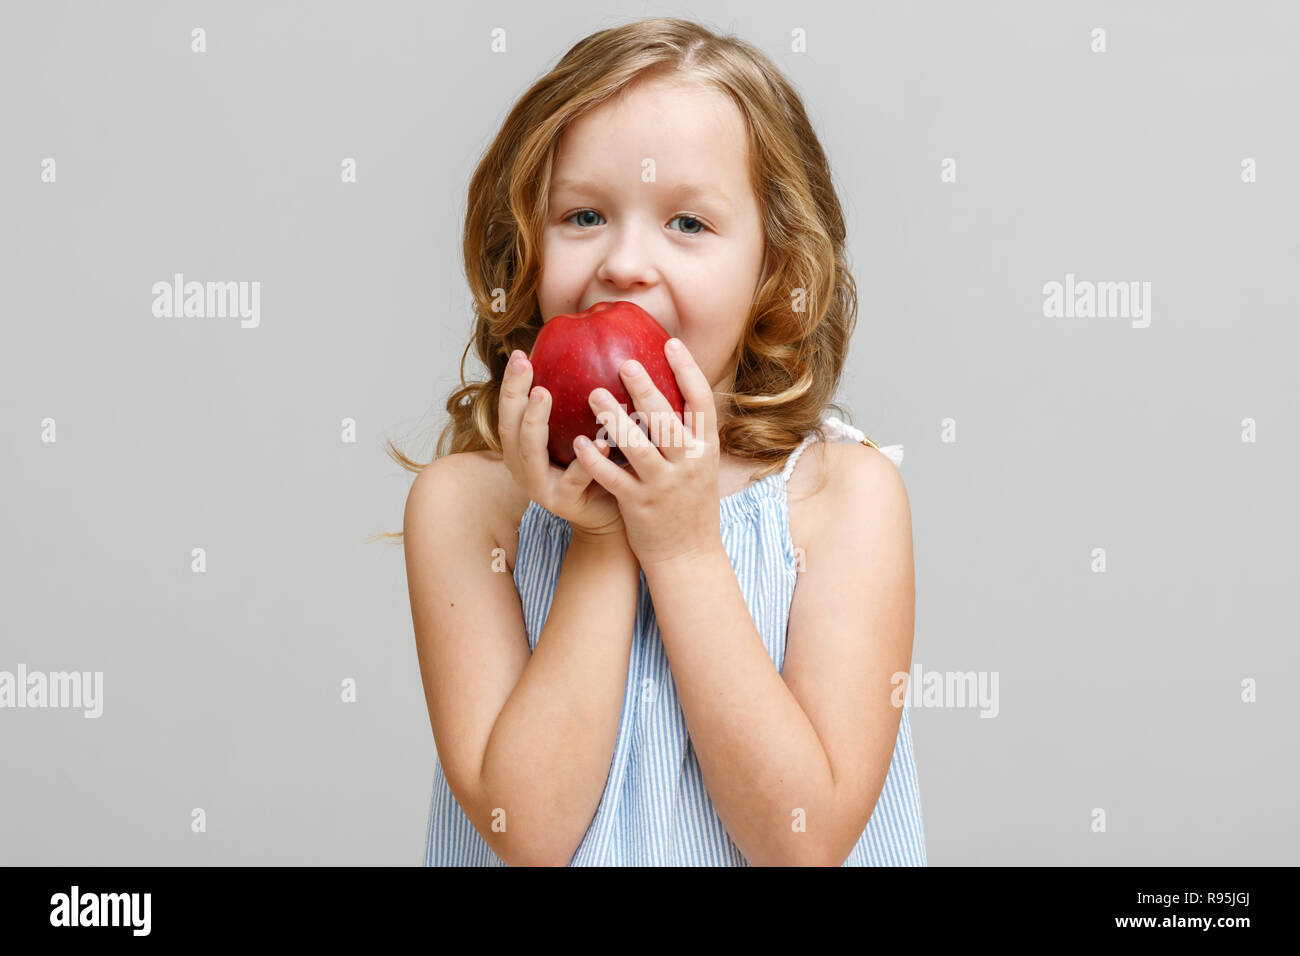 Portrait of a happy smiling little blonde girl on a gray background. Baby bites red apple Stock Photo